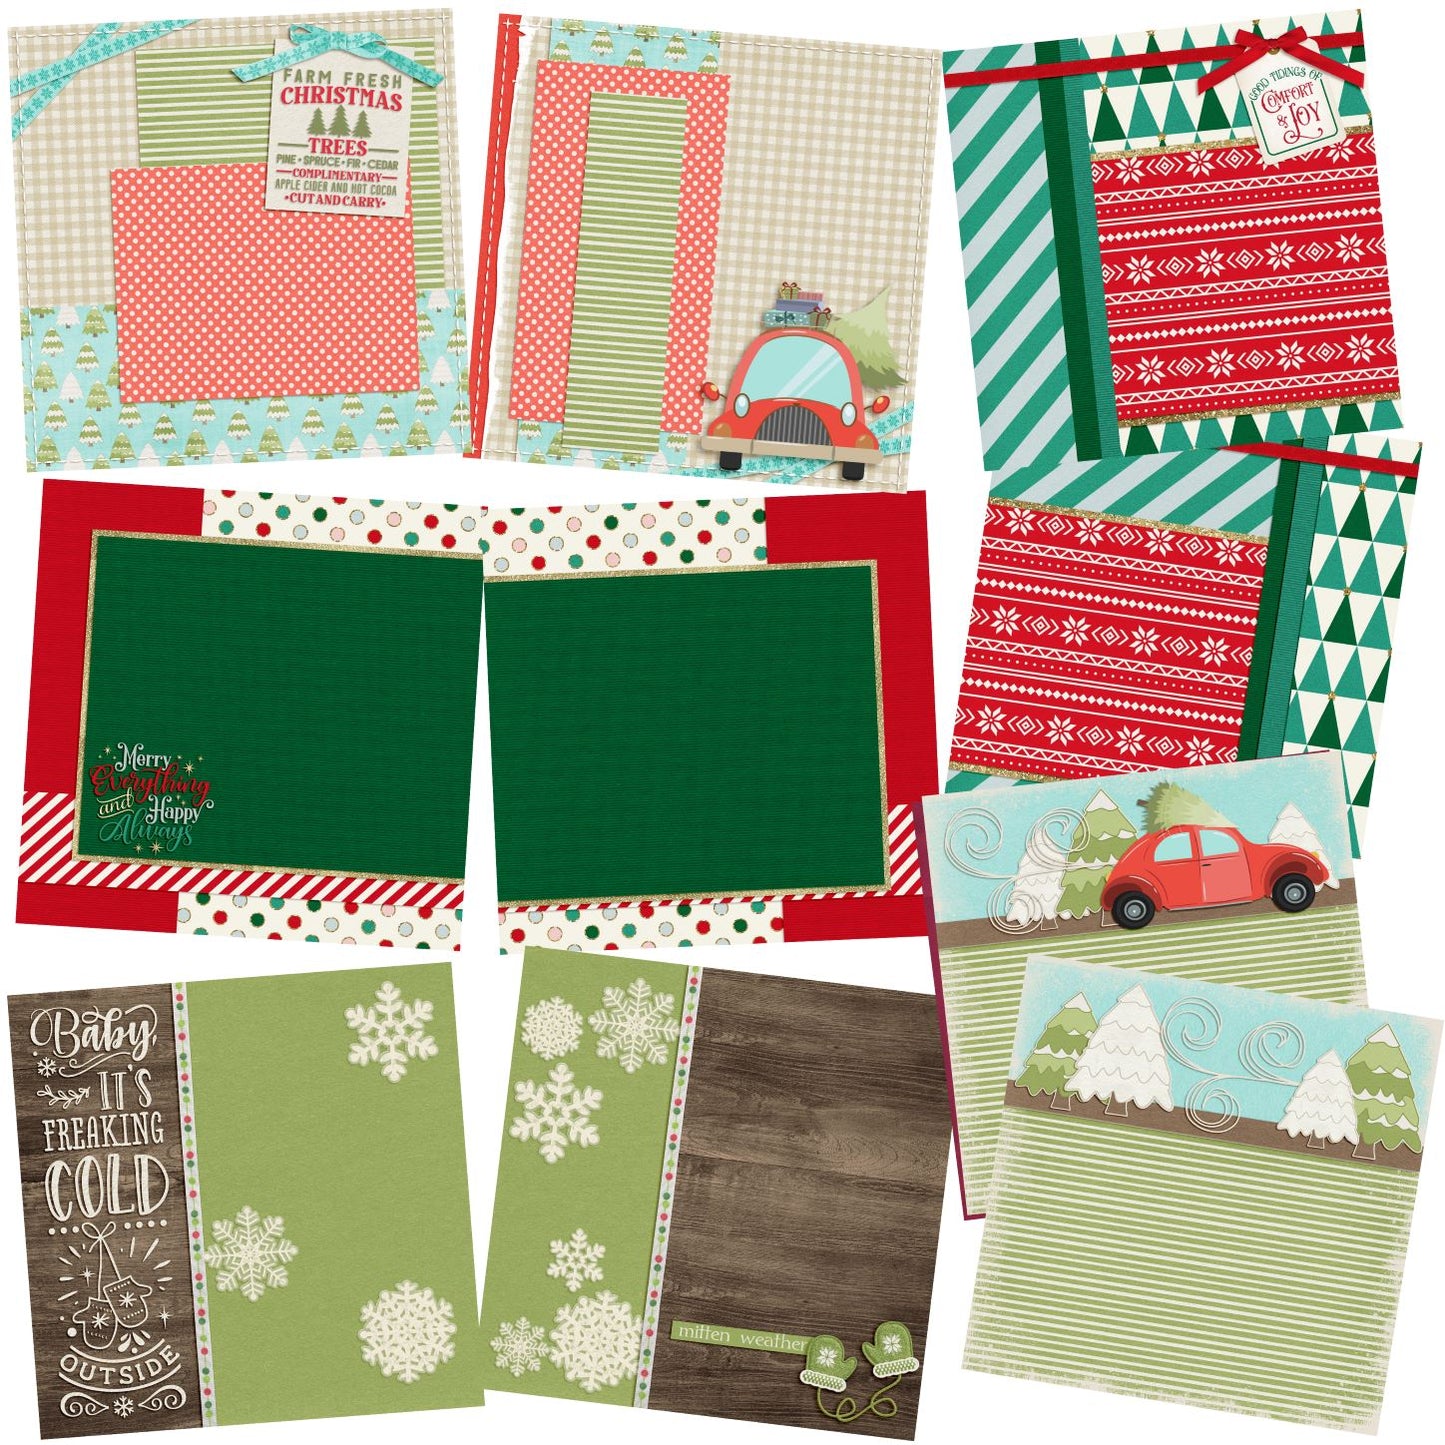 Merry Everything - Christmas - EZ Background Pages -  Digital Bundle - 10 Digital Scrapbook Pages - INSTANT DOWNLOAD